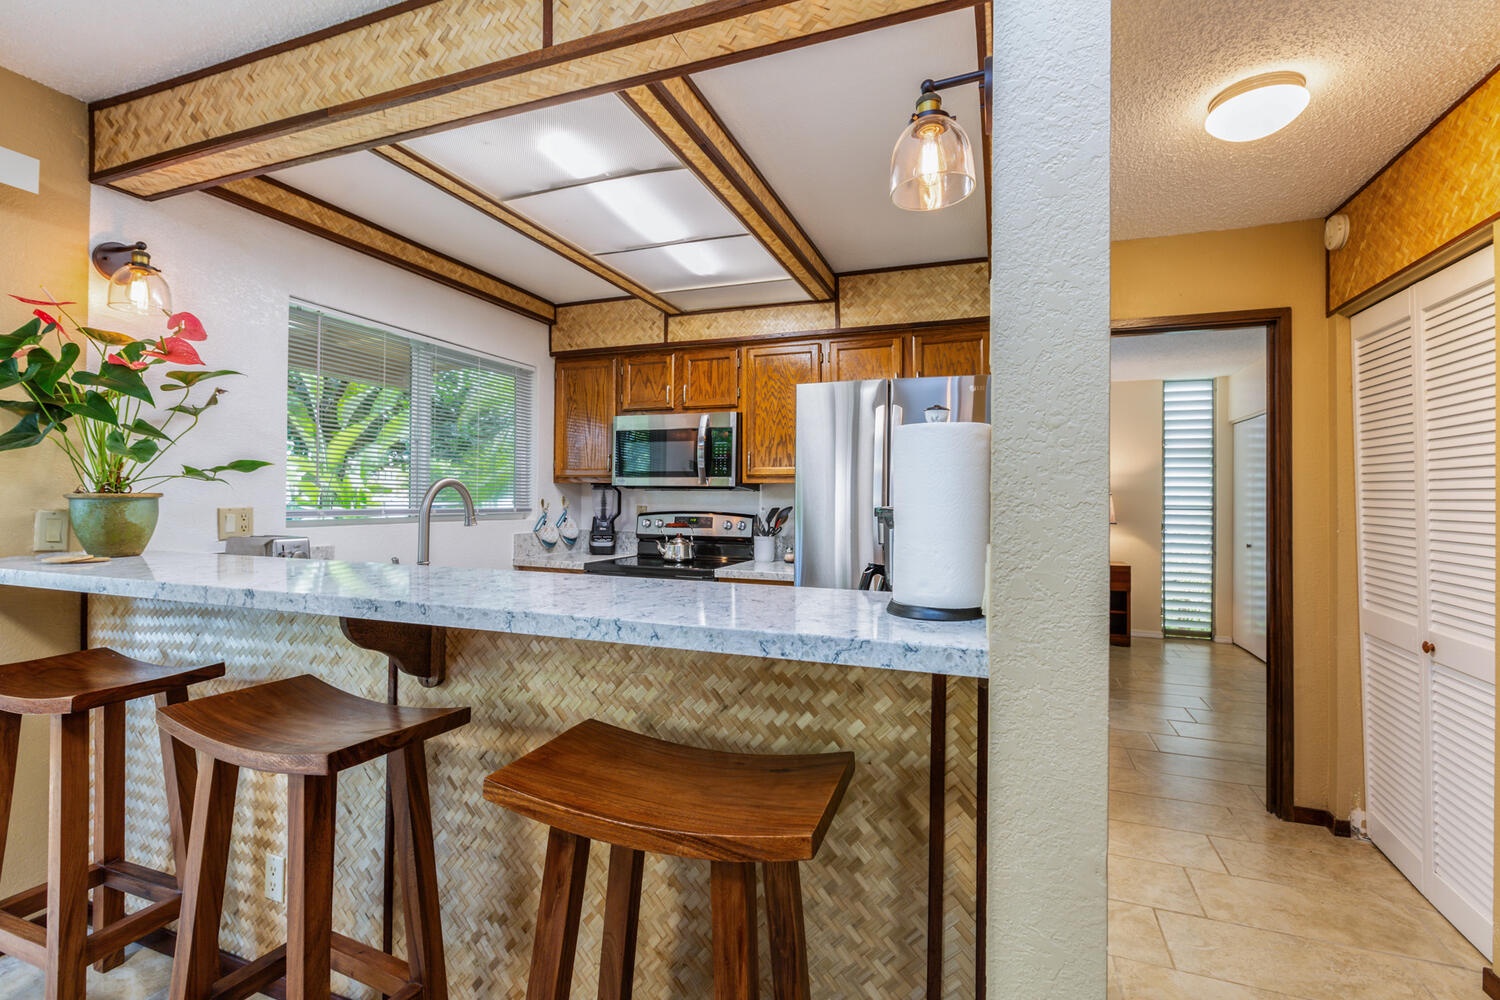 Princeville Vacation Rentals, Hideaway Haven - Savor quick meals and entertainment at the kitchen island/bar.